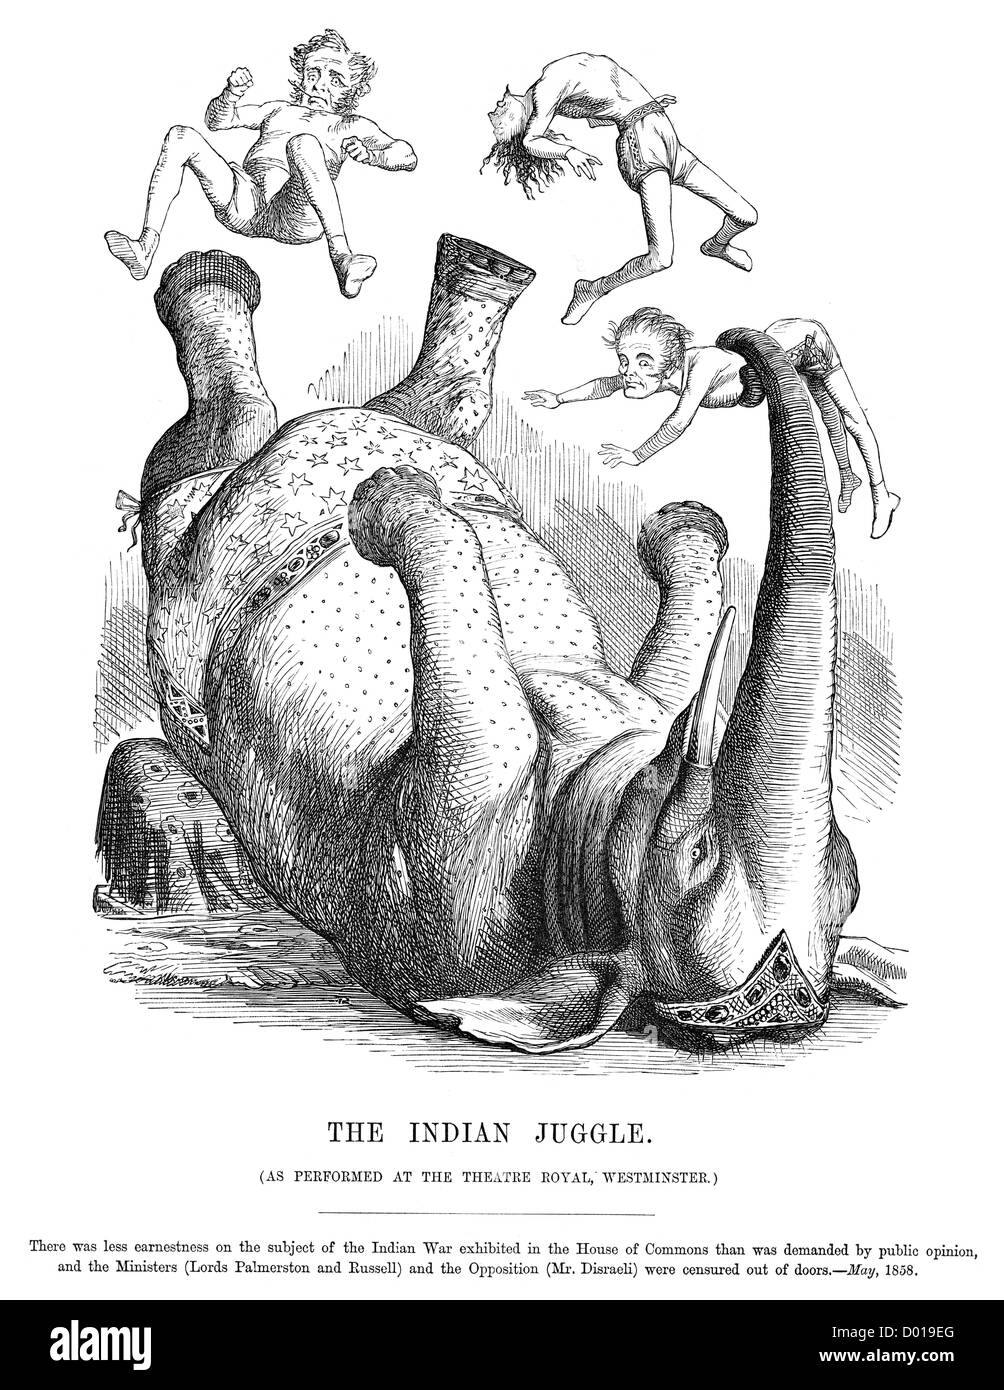 The Indian Juggle. Caricature of Lords Palmerston, Russell and Mr Disraeli, over the Indian Mutiny, May 1858. Stock Photo